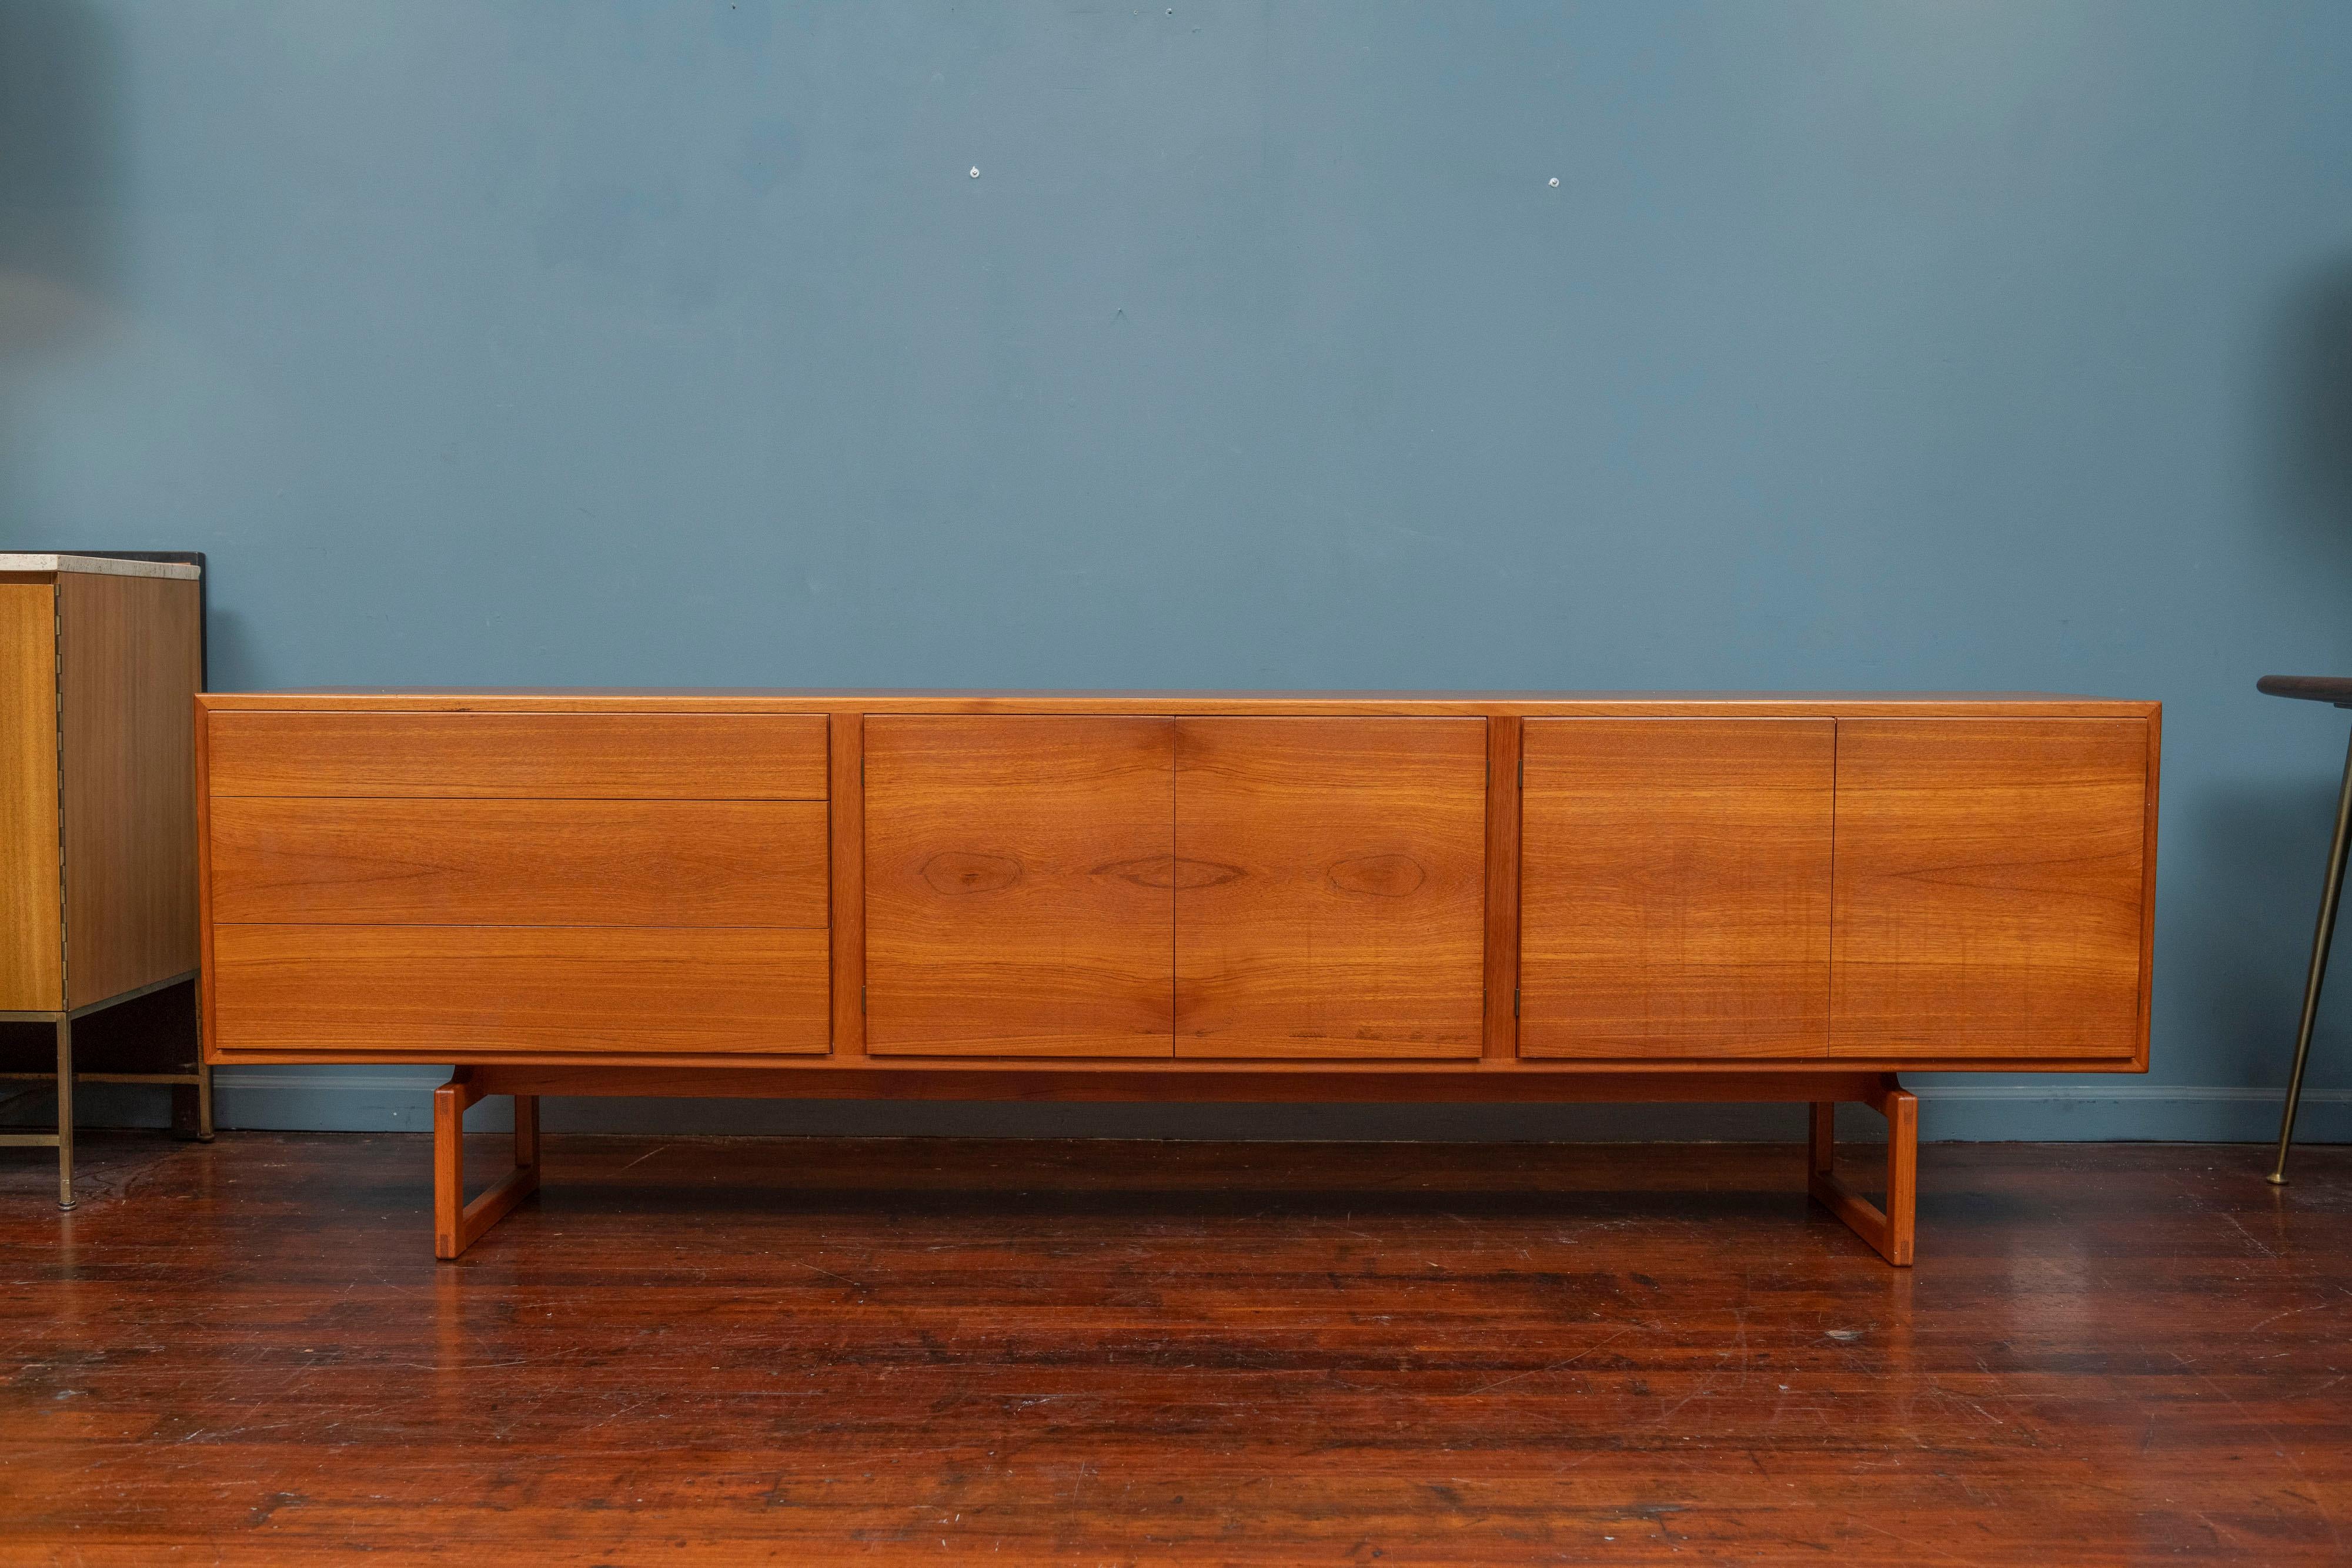 ib Kofod-Larsen large teak credenza, Denmark. Long low credenza perfect as a media cabinet or for beneath art work, with lots of storage capacity. Comprising two open cabinets with adjustable shelves and a set of three drawers. In very good original